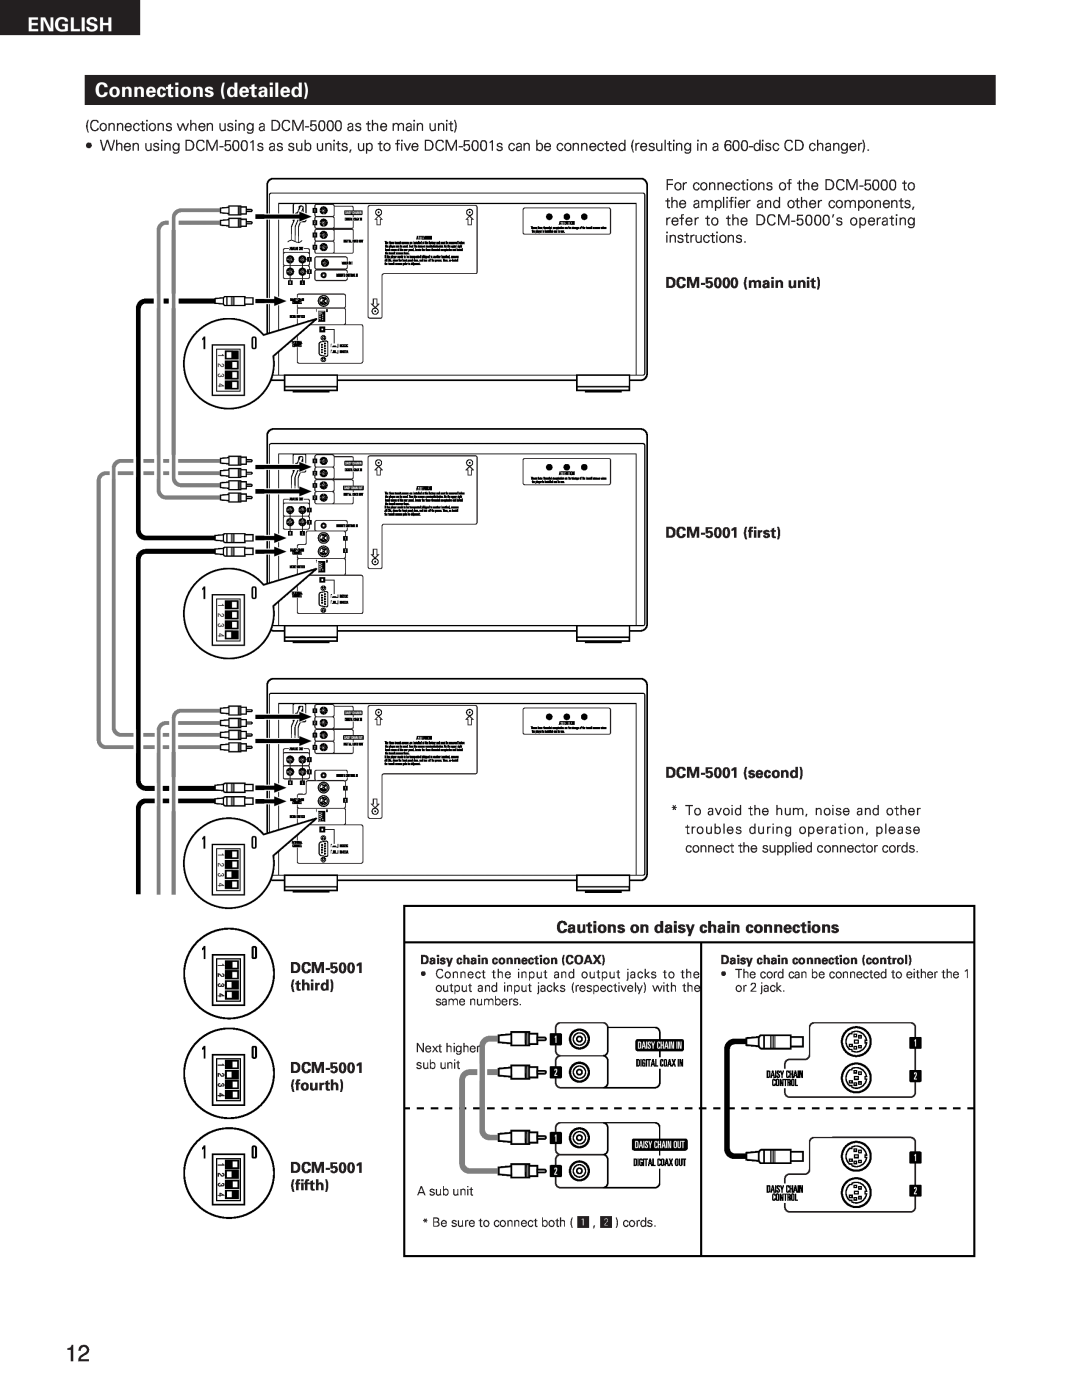 Denon DCM-5001 manual ENGLISH Connections detailed, Cautions on daisy chain connections 